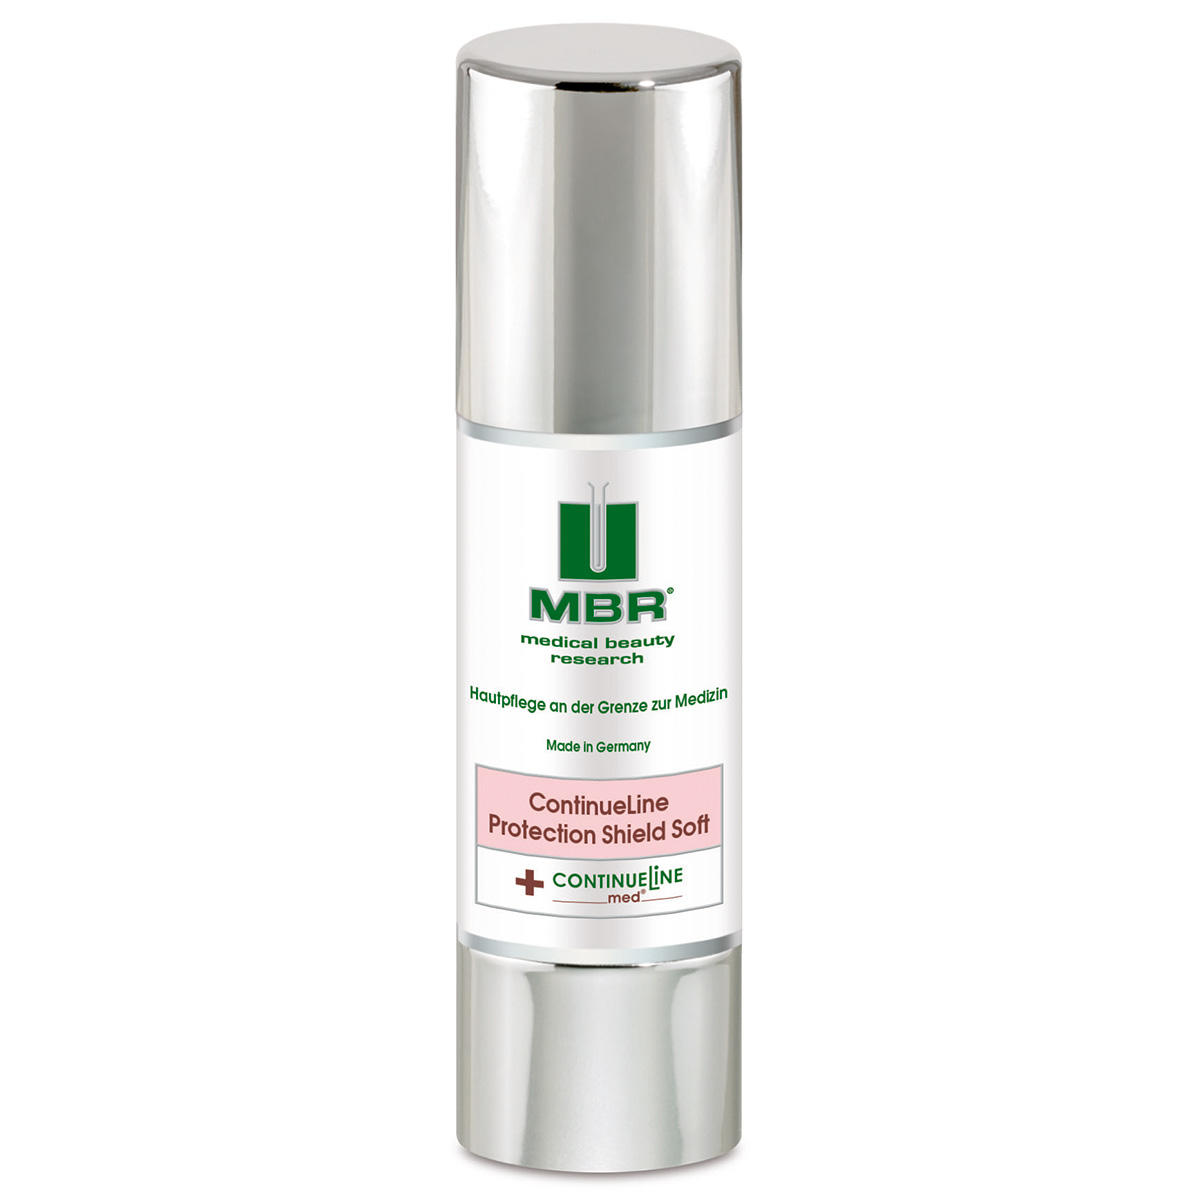 MBR Medical Beauty Research ContinueLine med ContinueLine Protection Shield Soft 50 ml - 1